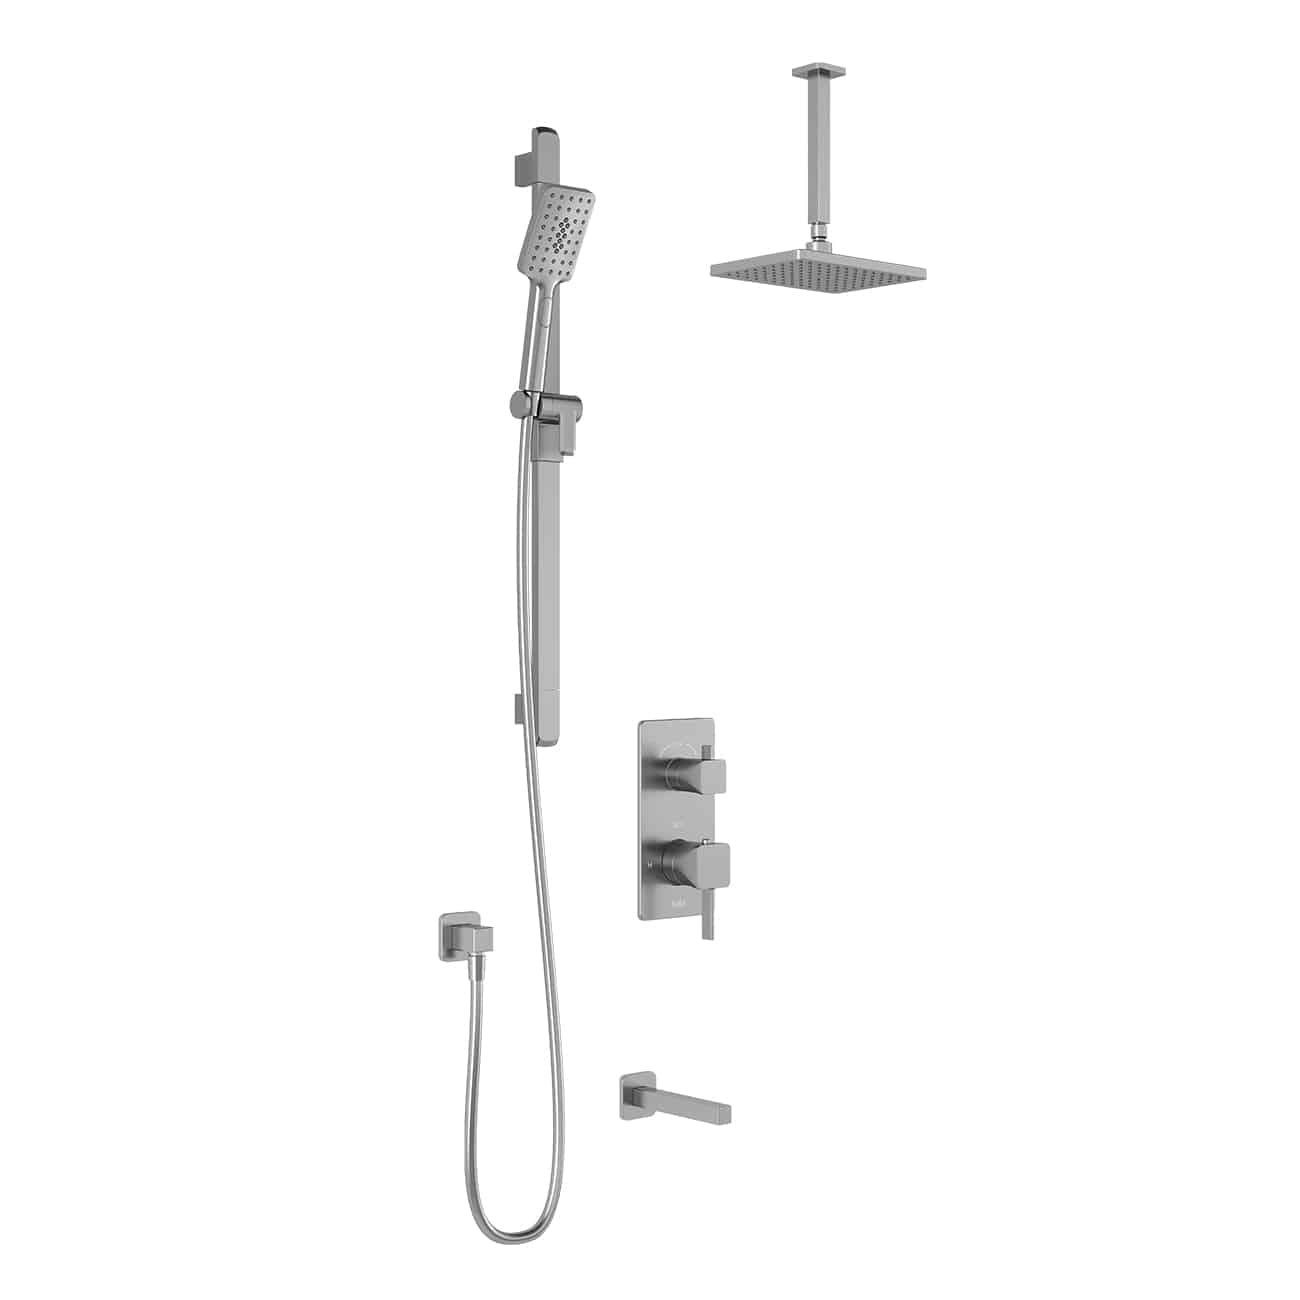 Kalia SquareOne TD3 AQUATONIK T/P with Diverter Shower System with 10-1/4" Shower Head with Vertical Ceiling Arm -Chrome